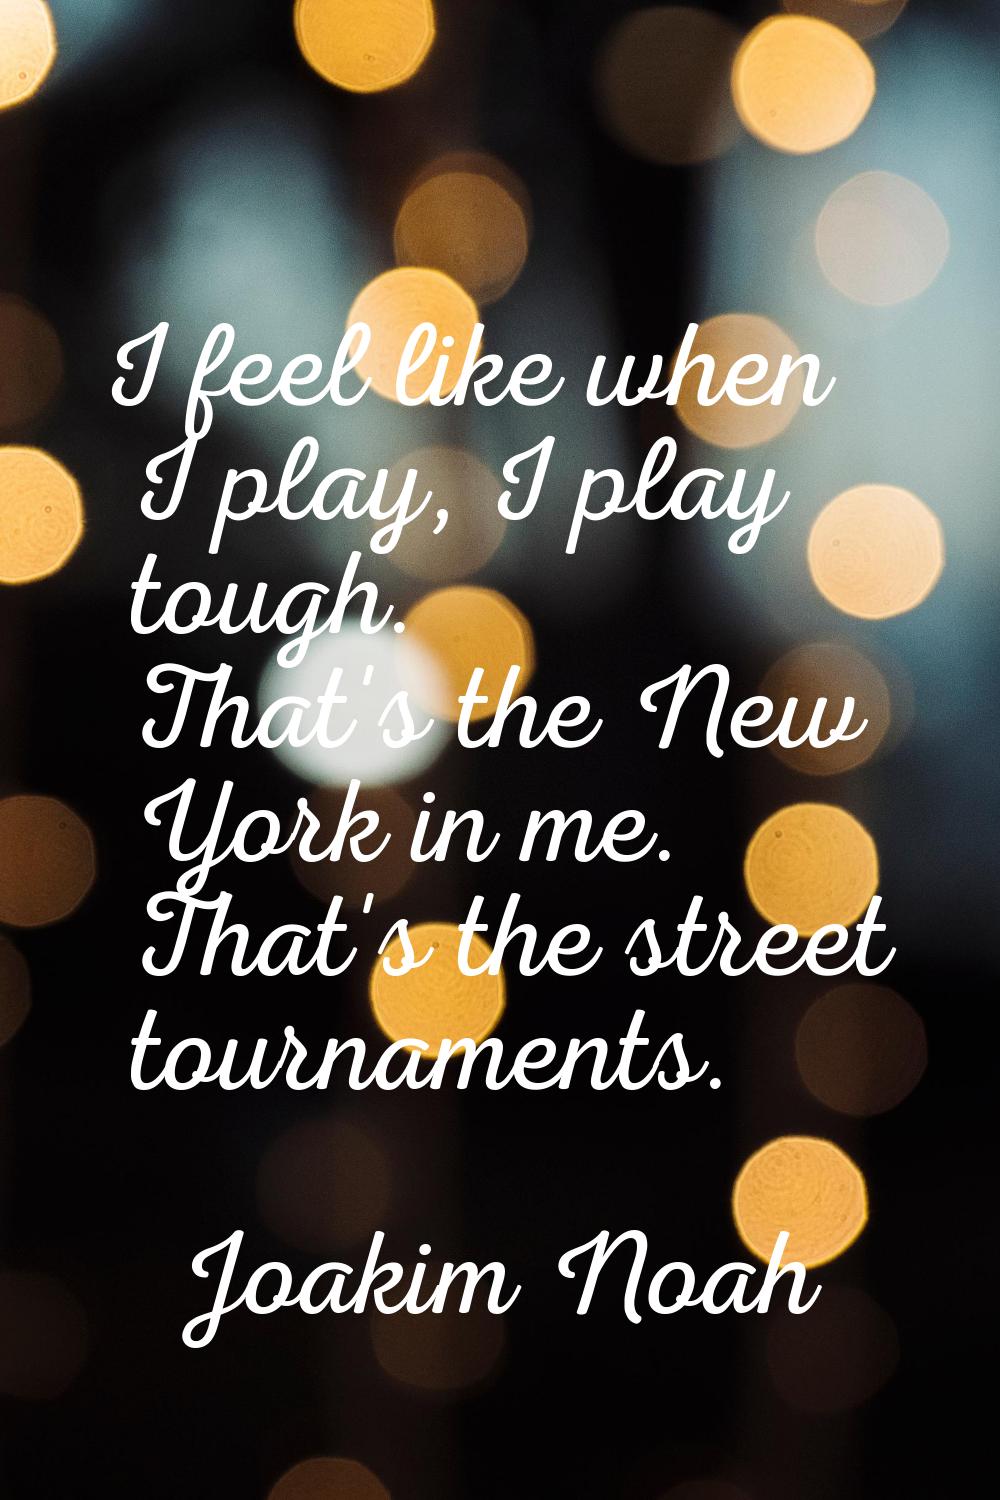 I feel like when I play, I play tough. That's the New York in me. That's the street tournaments.